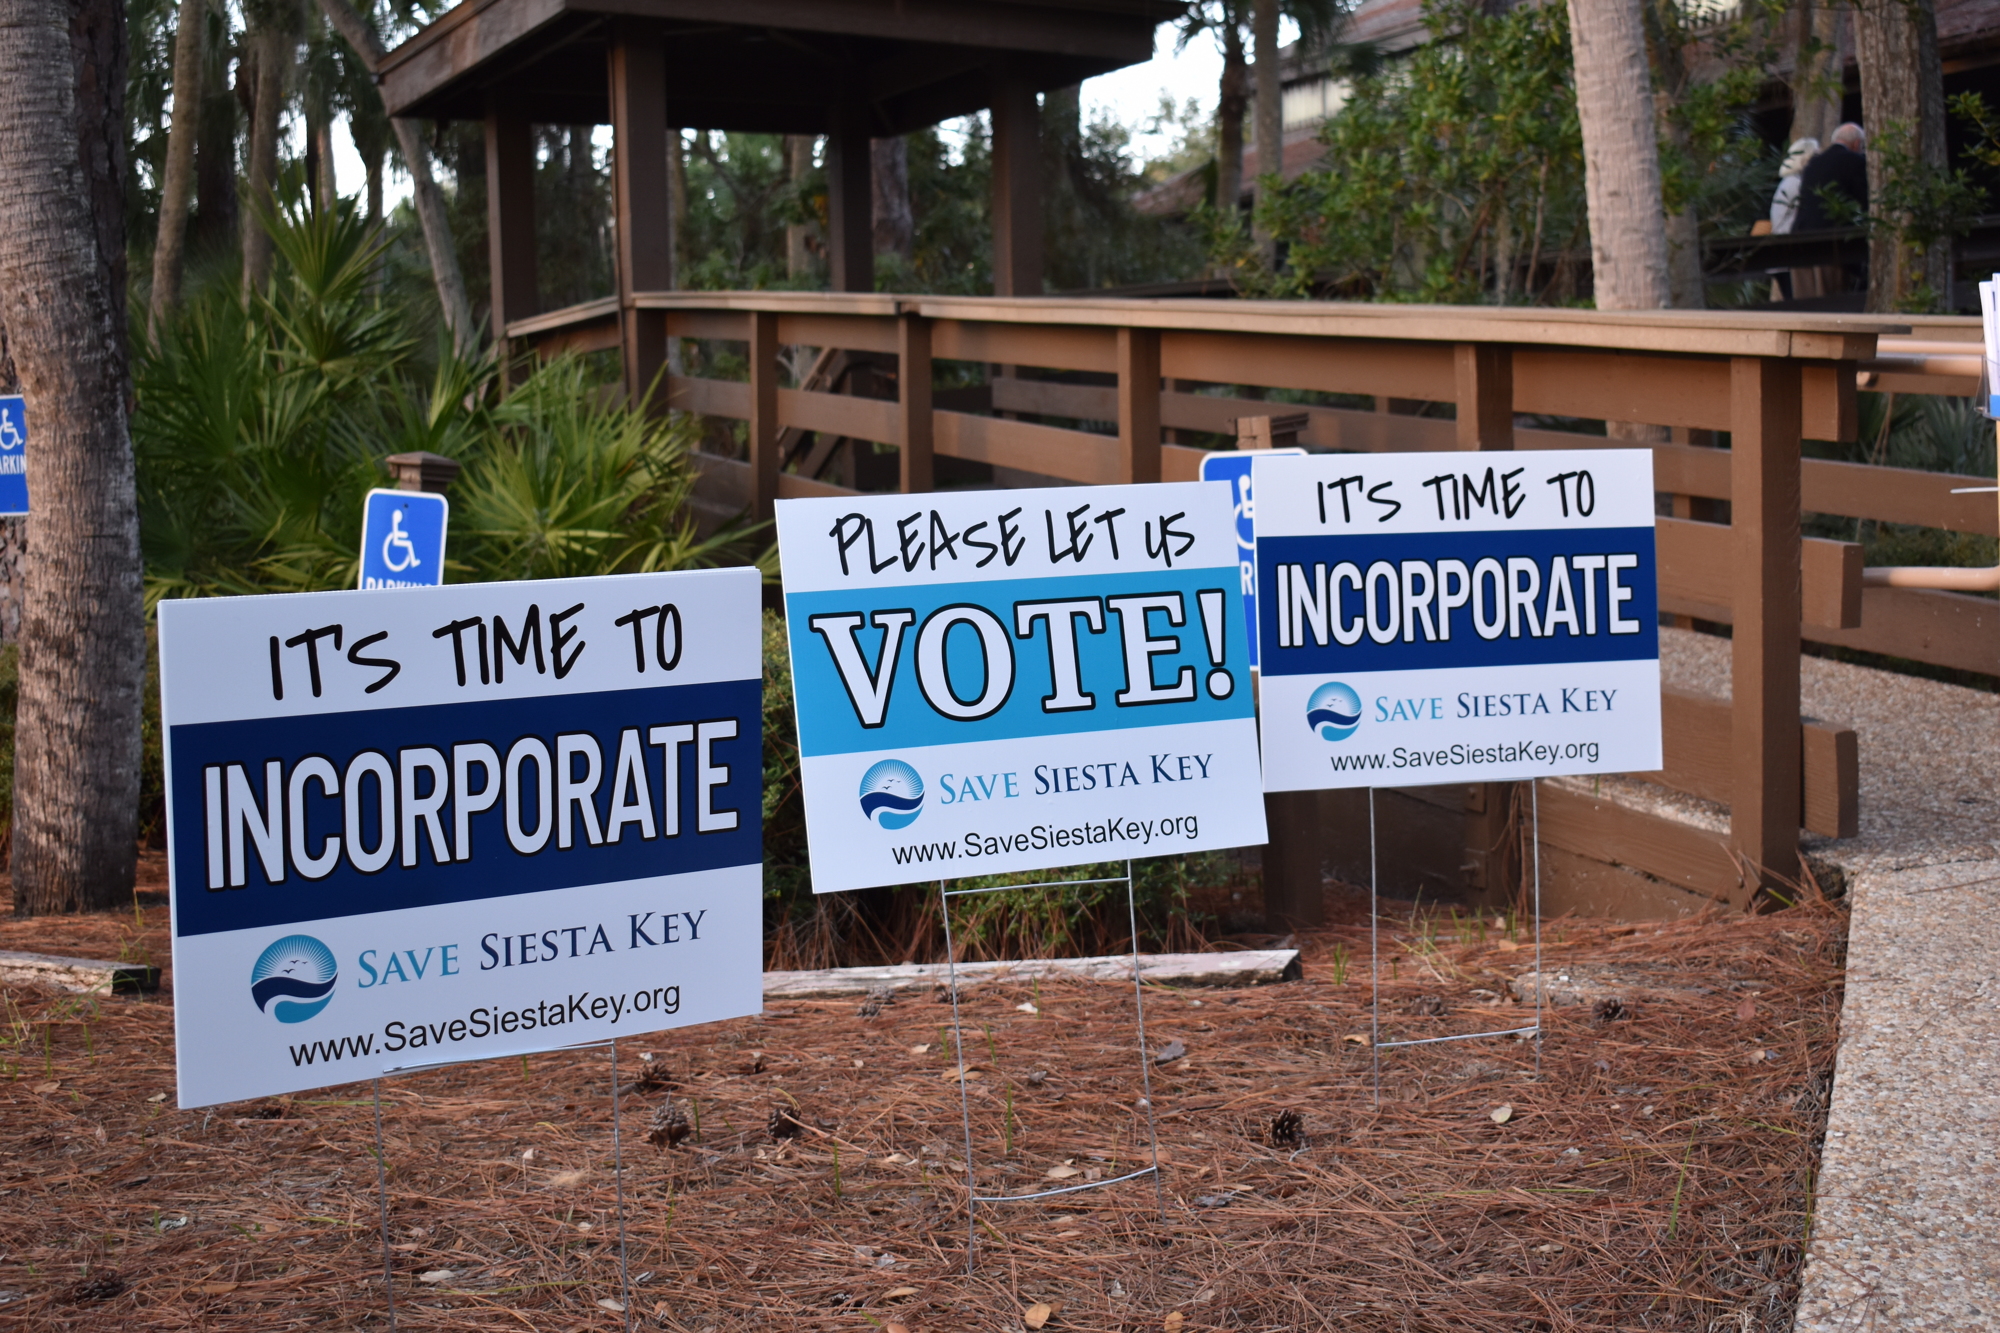 Supporters of the incorporation plan were selling yard signs as a fundraiser.